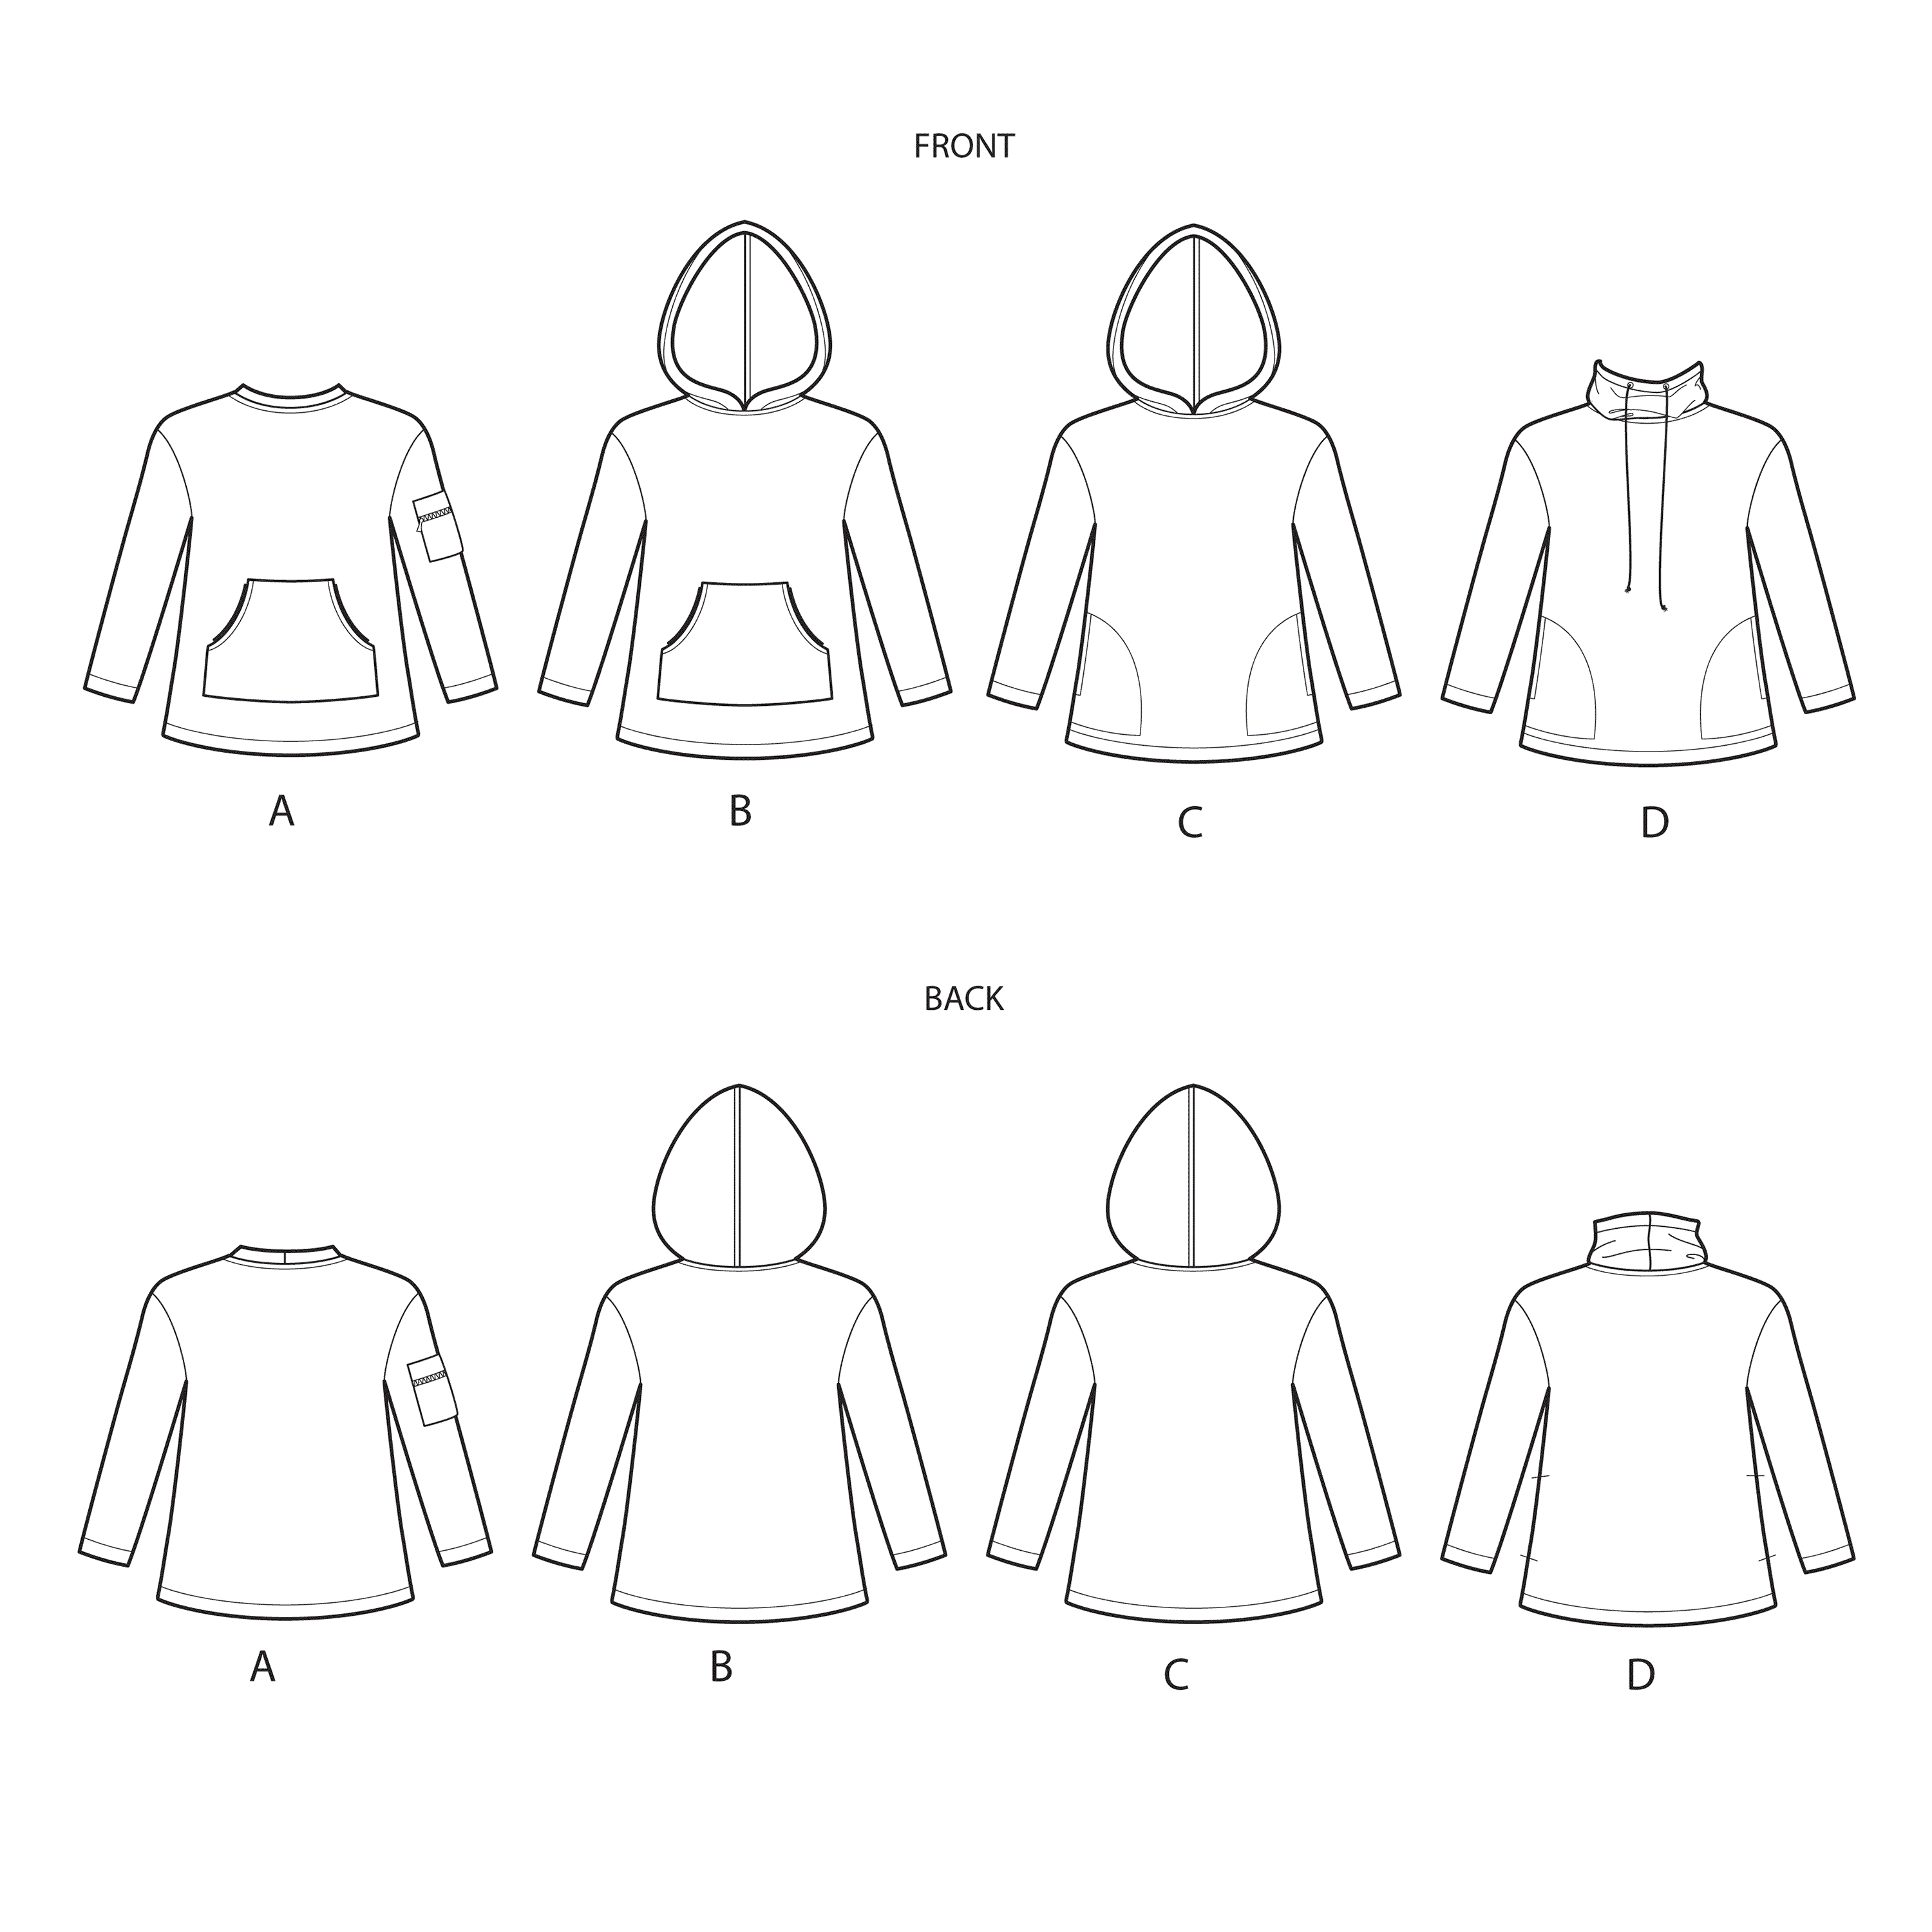 Simplicity Pattern 9028 Girls' / Boys' Knot Tops with Hoodie from Jaycotts Sewing Supplies